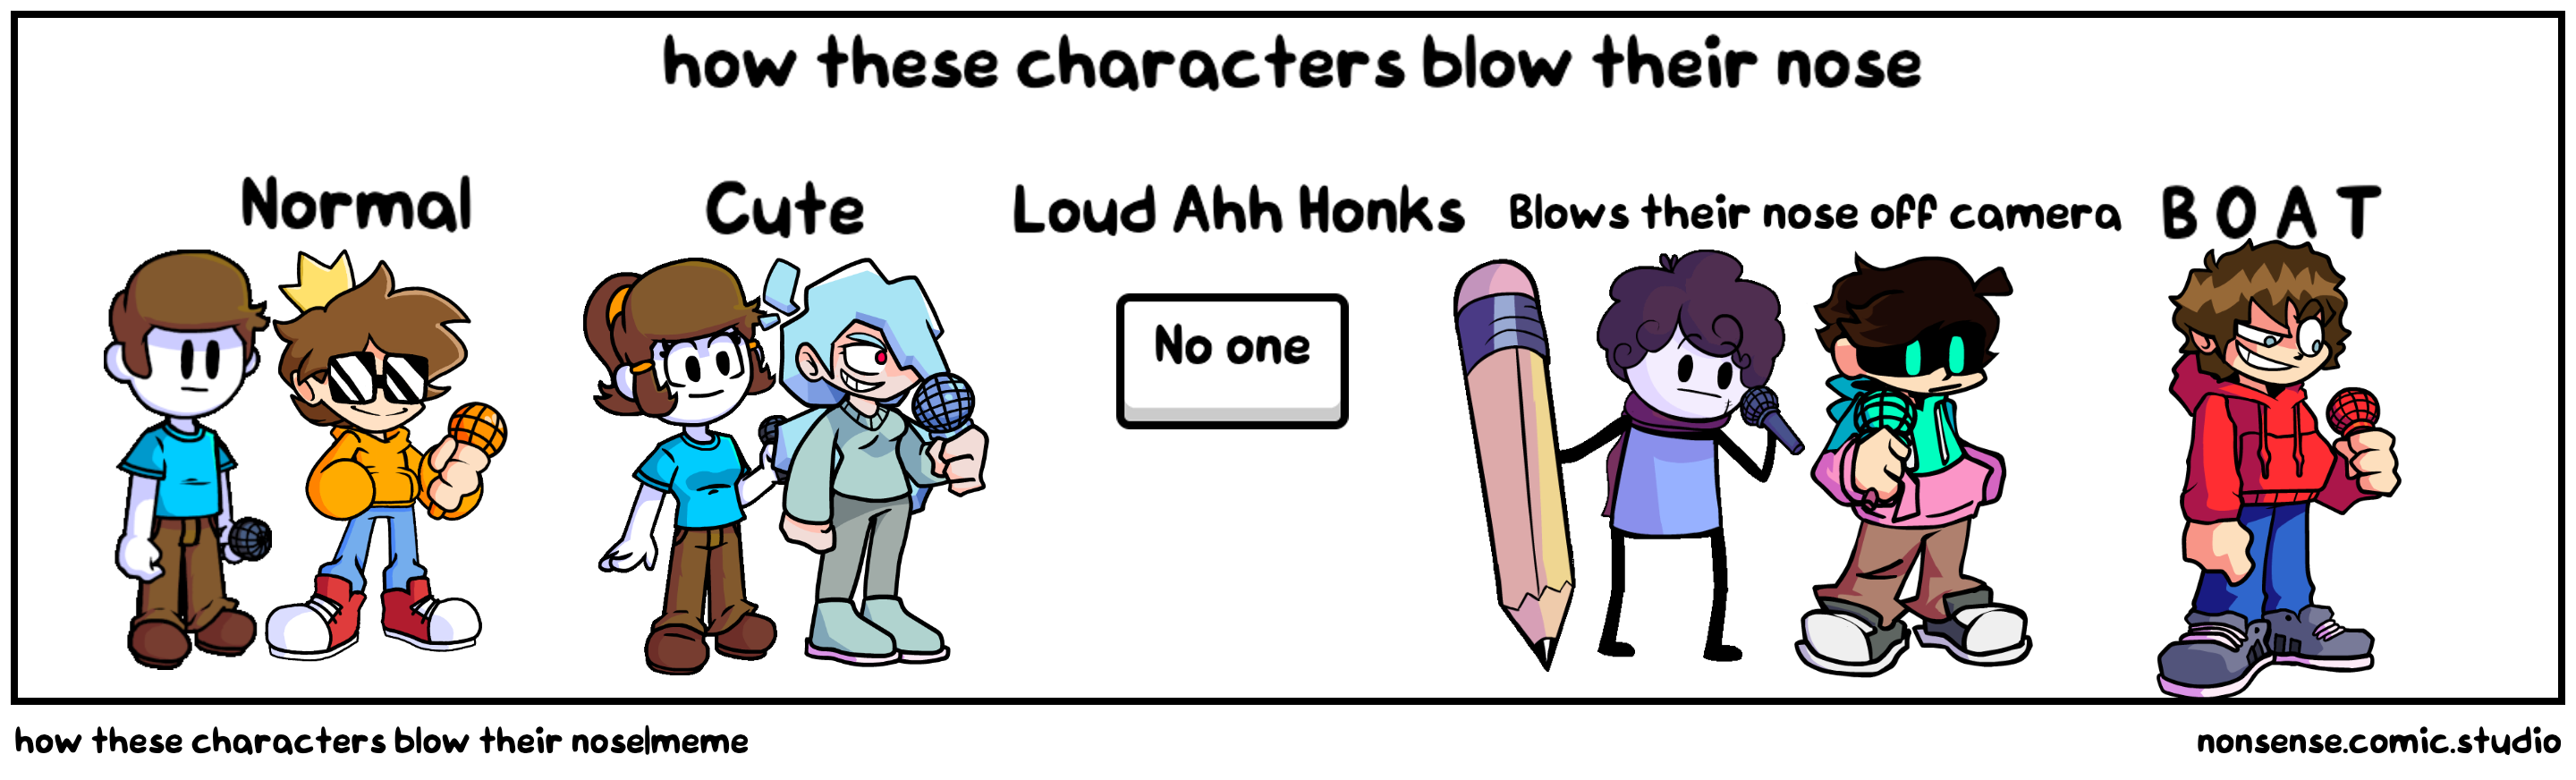 how these characters blow their nose|meme